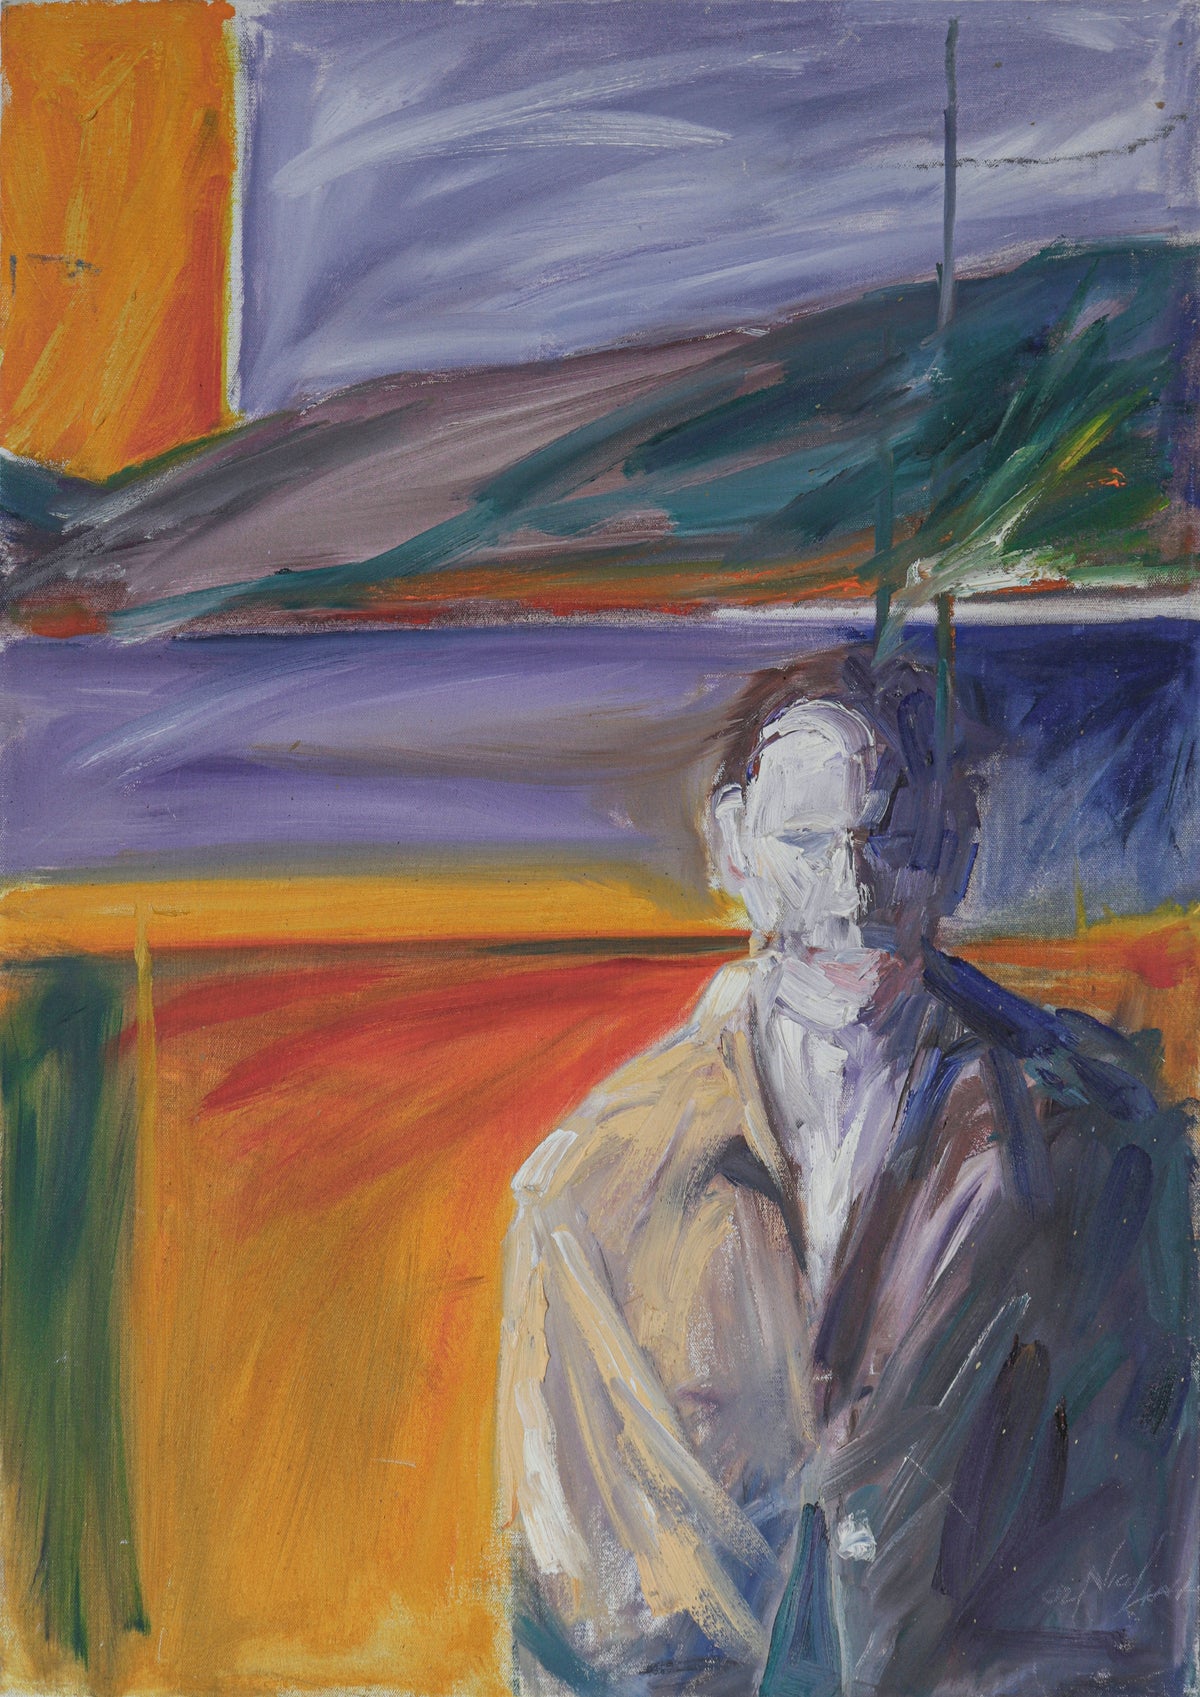 Abstracted Figure by the Bay &lt;br&gt;2002 Oil &lt;br&gt;&lt;br&gt;#C1574